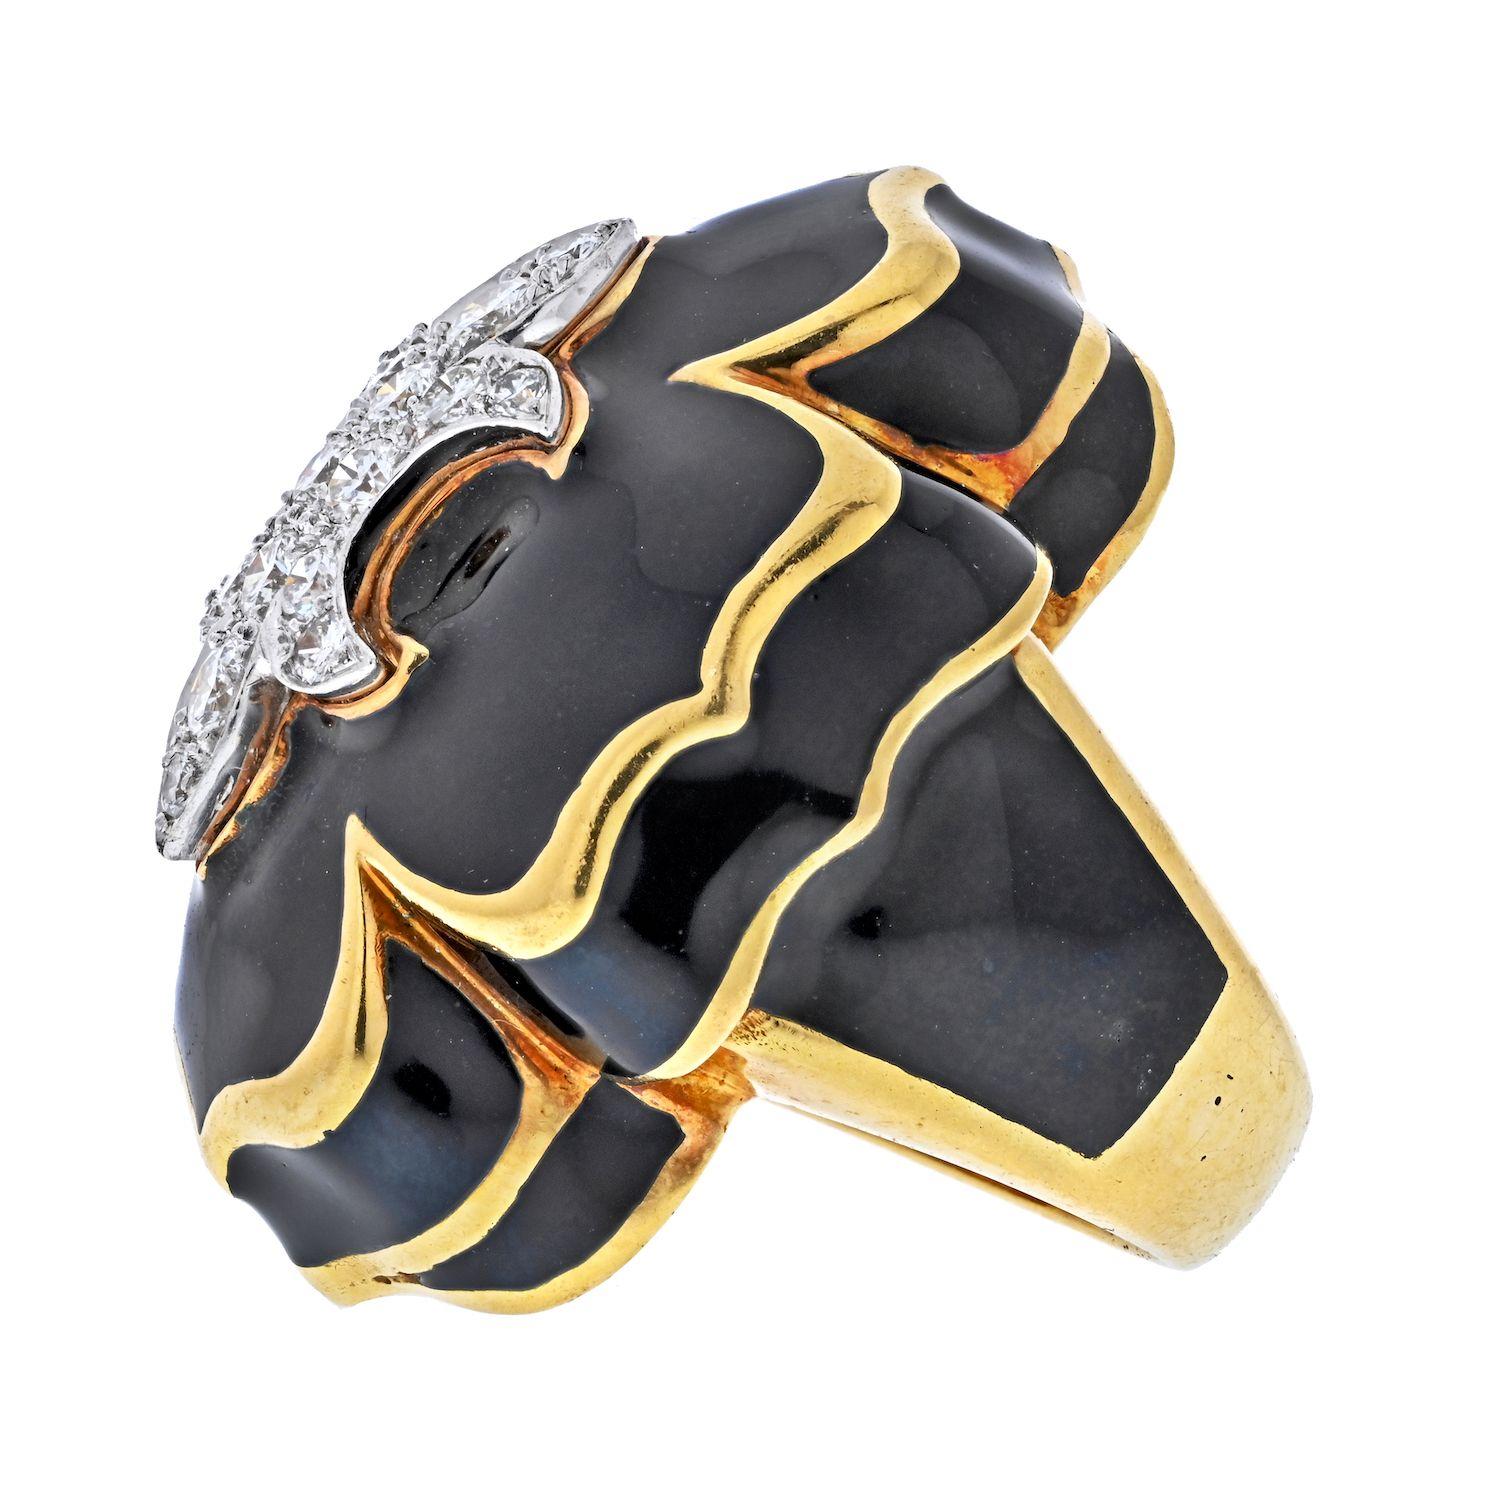 A statement cocktail ring made in 18K Yellow Gold with Fleur de Lis Motif ring by David Webb.
Featuring 0.75 Carats of Round Brilliant Diamonds.
Black Enamel.
Measurements: Band Width 12.7mm, Ornament Width 26.1mm, Ornament Length 32.7mm